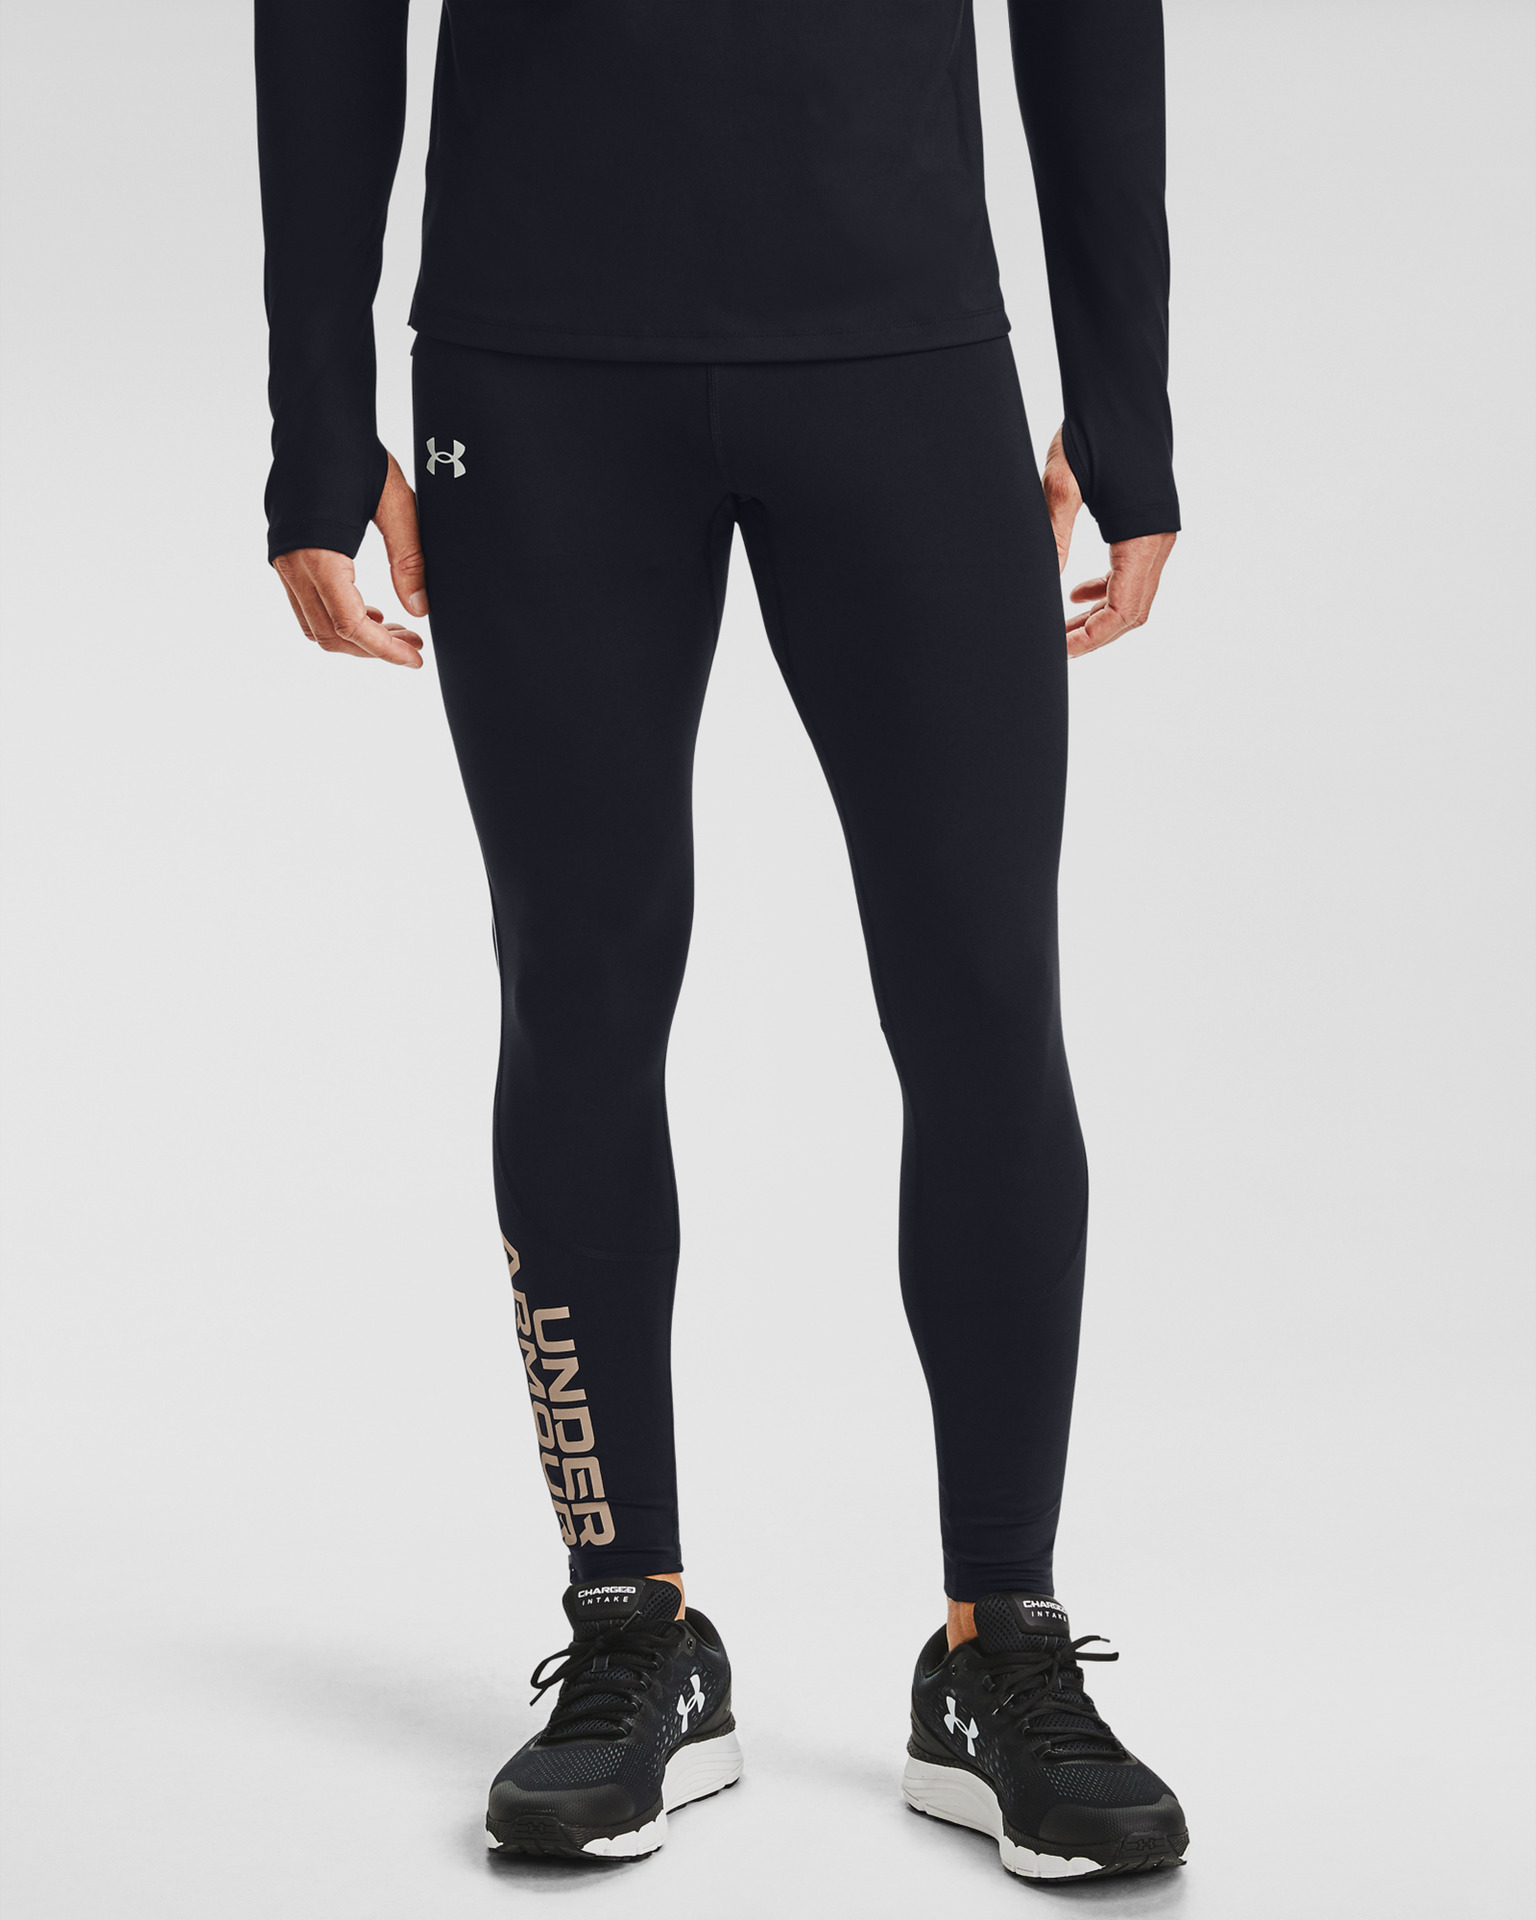 Under Armour Men's Core Fly Fast 3.0 Cold Tight